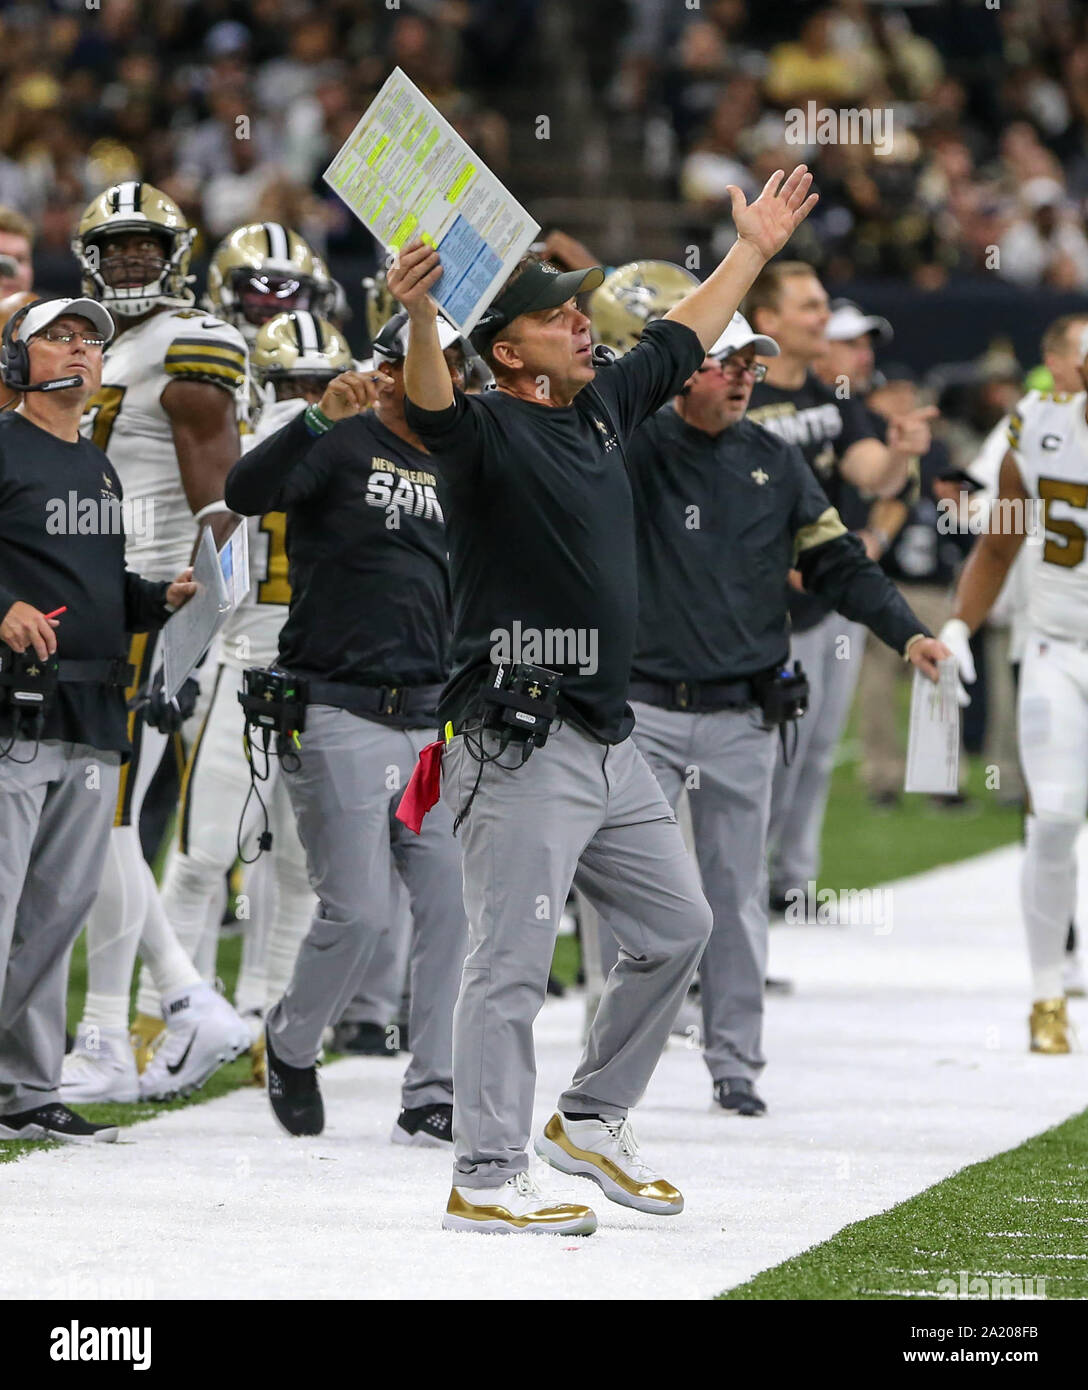 New Orleans, LA, USA. 29th Sep, 2019. New Orleans Saints Head Coach Sean Payton reacts to a penalty during NFL game action between the New Orleans Saints and the Dallas Cowboys at the Mercedes Benz Superdome in New Orleans, LA. Jonathan Mailhes/CSM/Alamy Live News Stock Photo